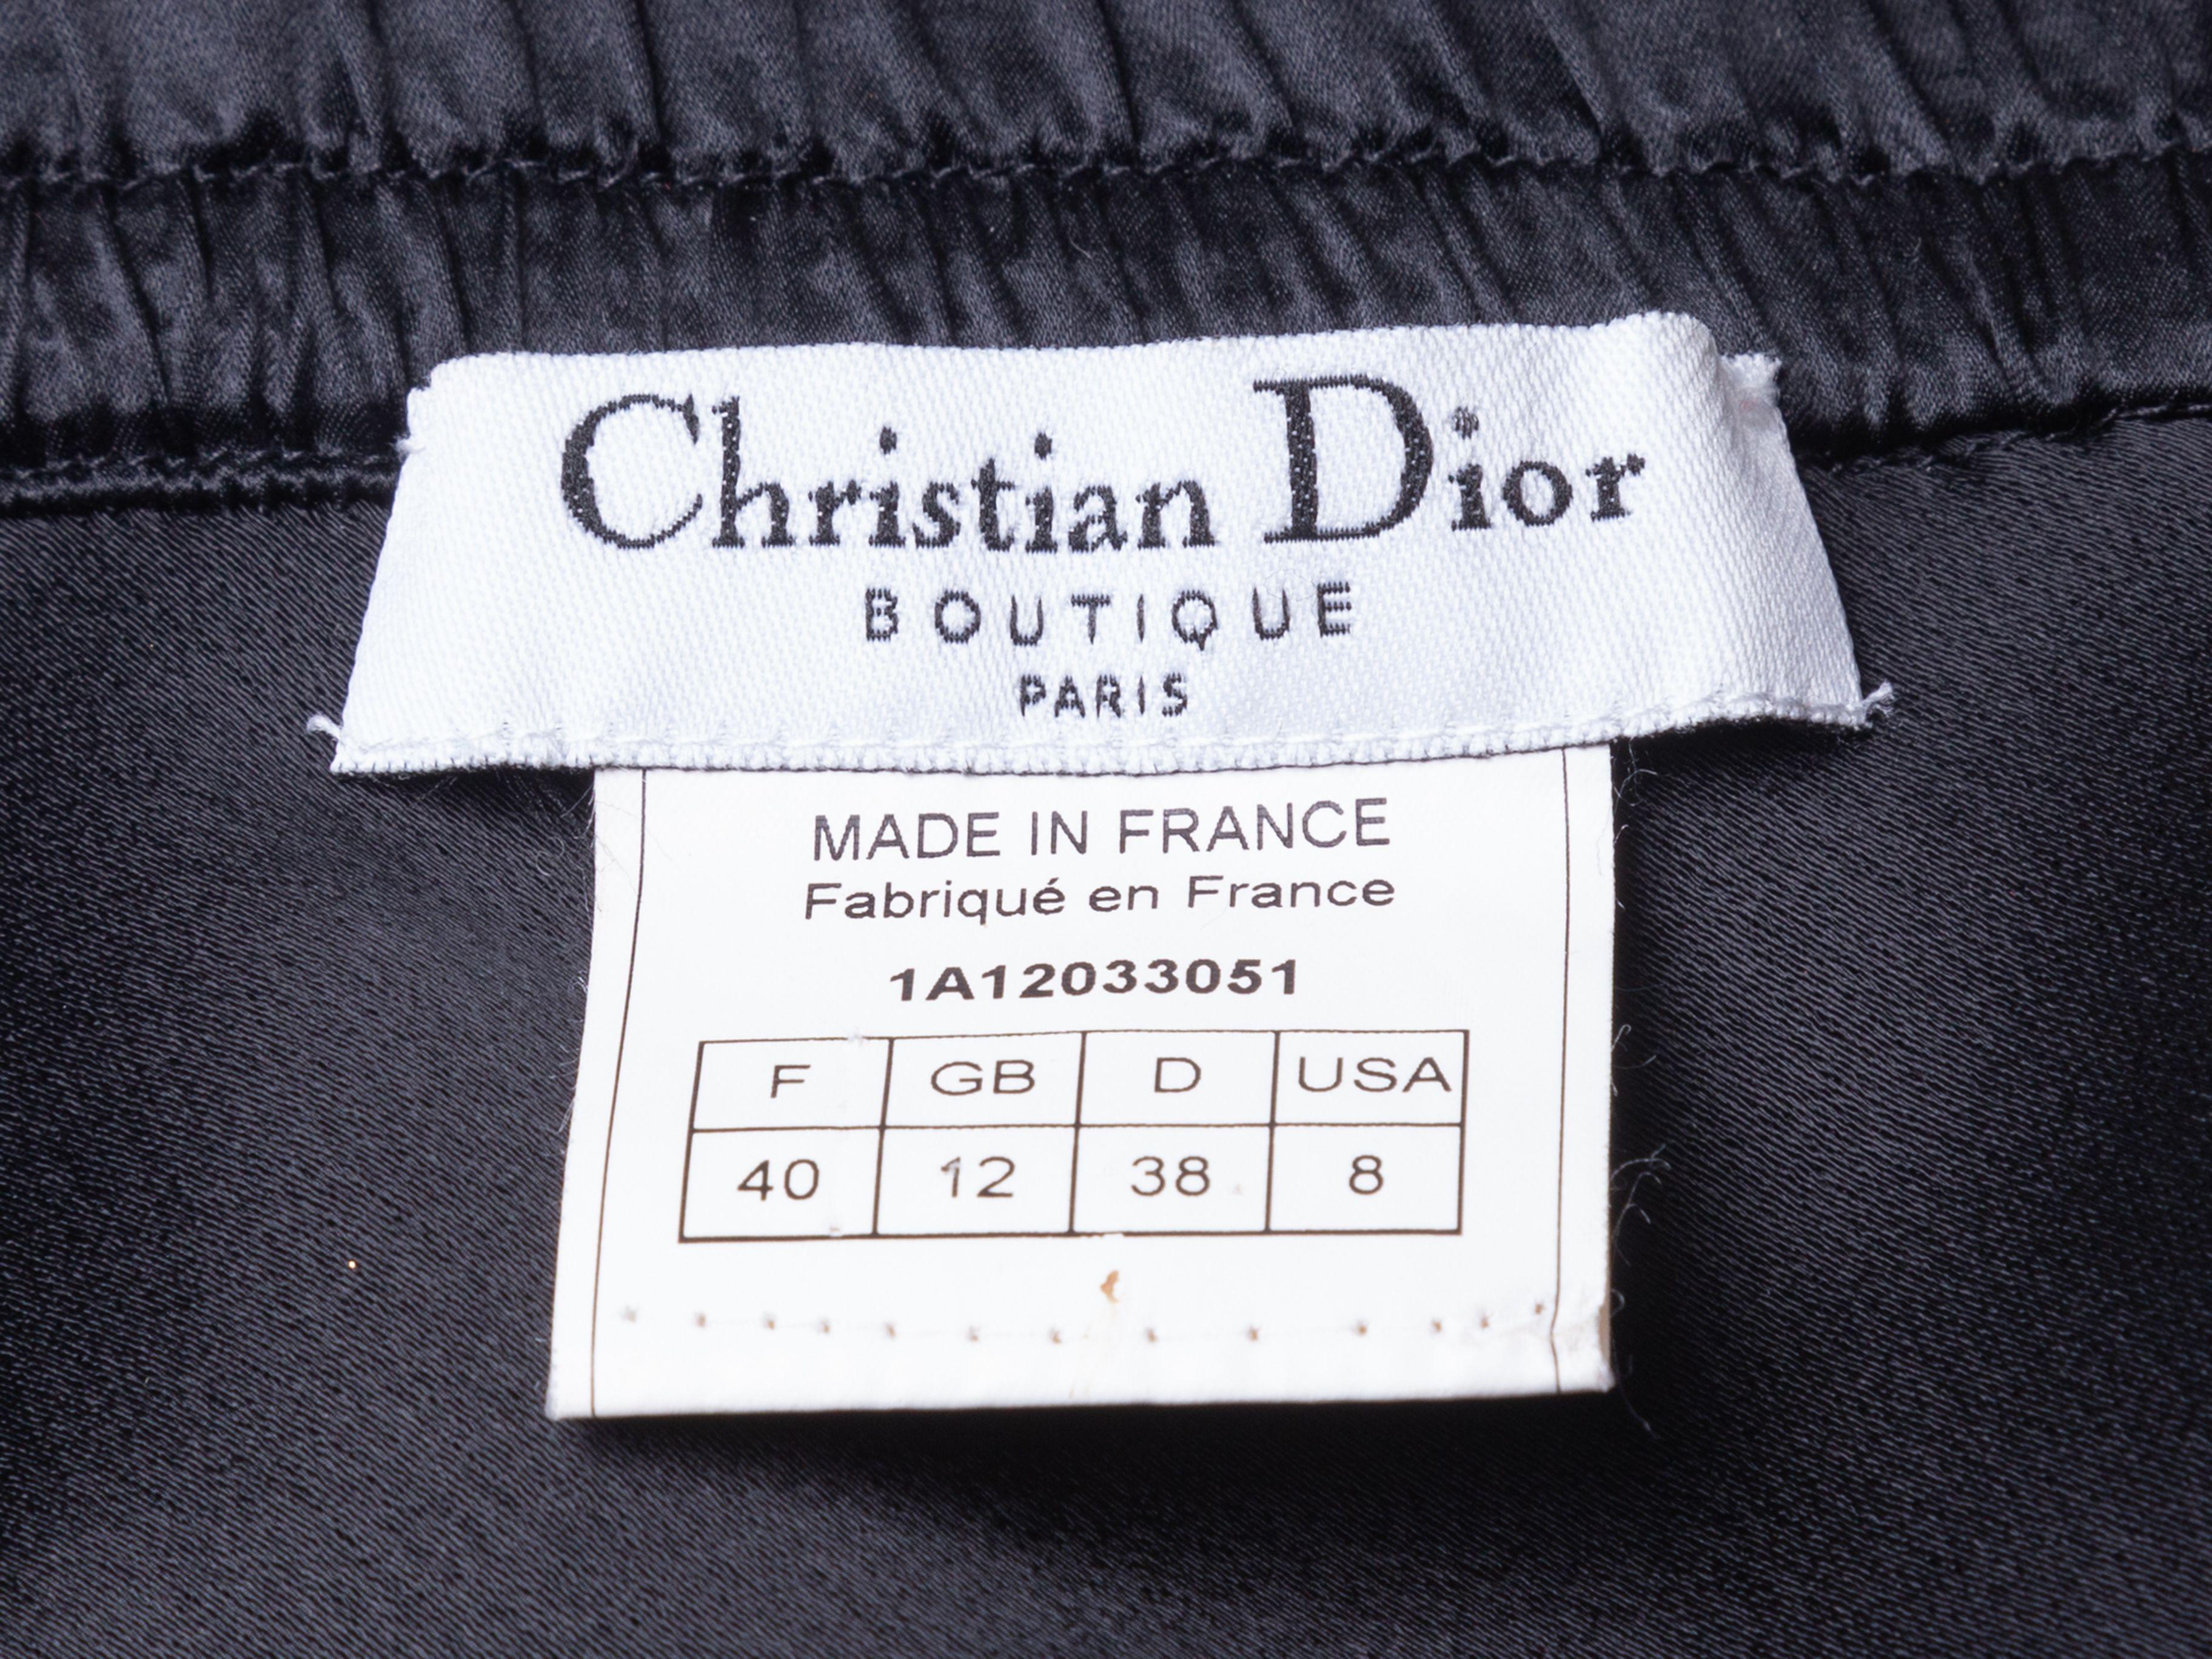 Product Details: Vintage black knee-length skirt by Christian Dior. Satin waistband. Lace trim at hem. Zip and snap closures at side. 27